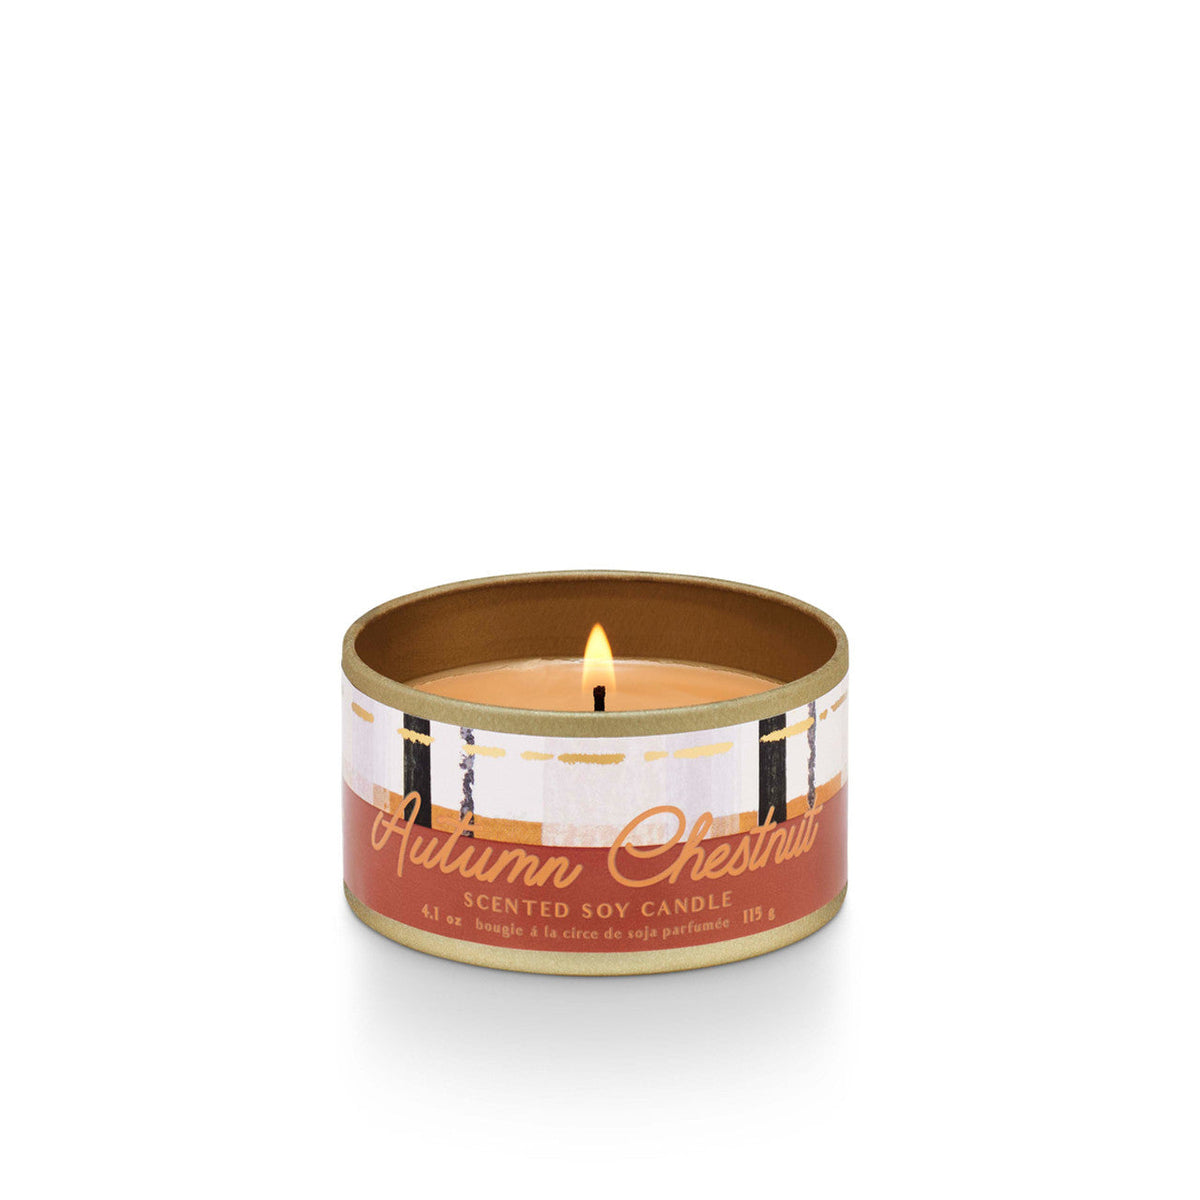 Autumn Chestnut Small Tried & True Tin Candle by Illume